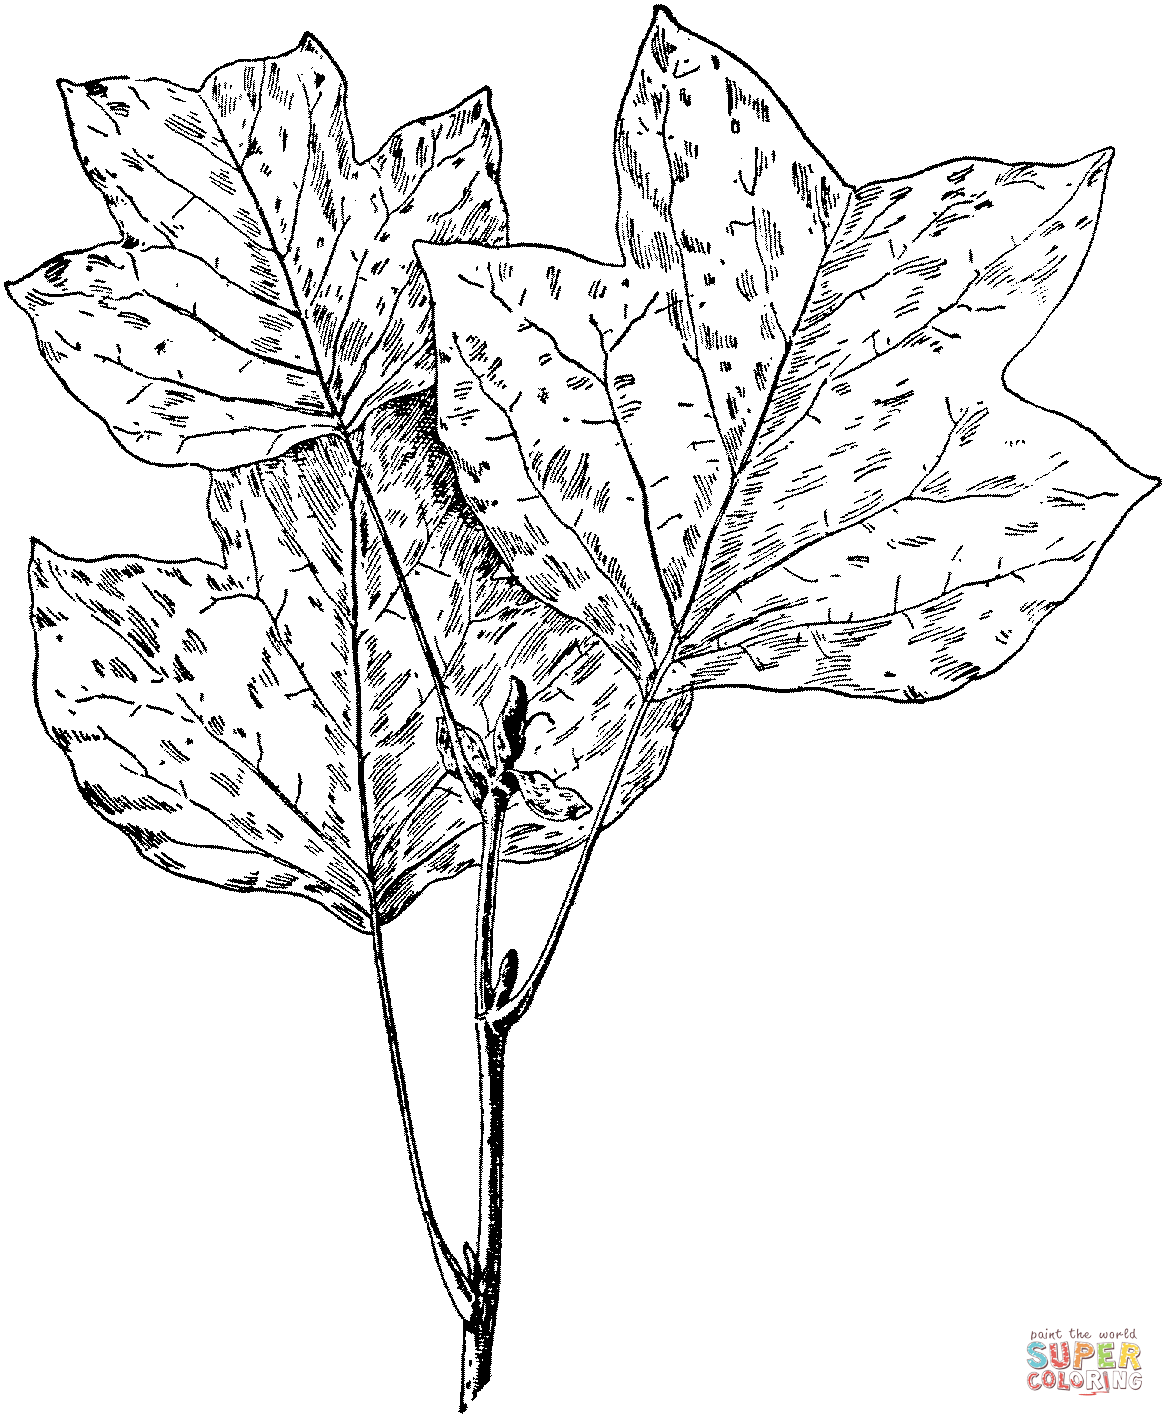 Cottonwood Trees coloring #3, Download drawings